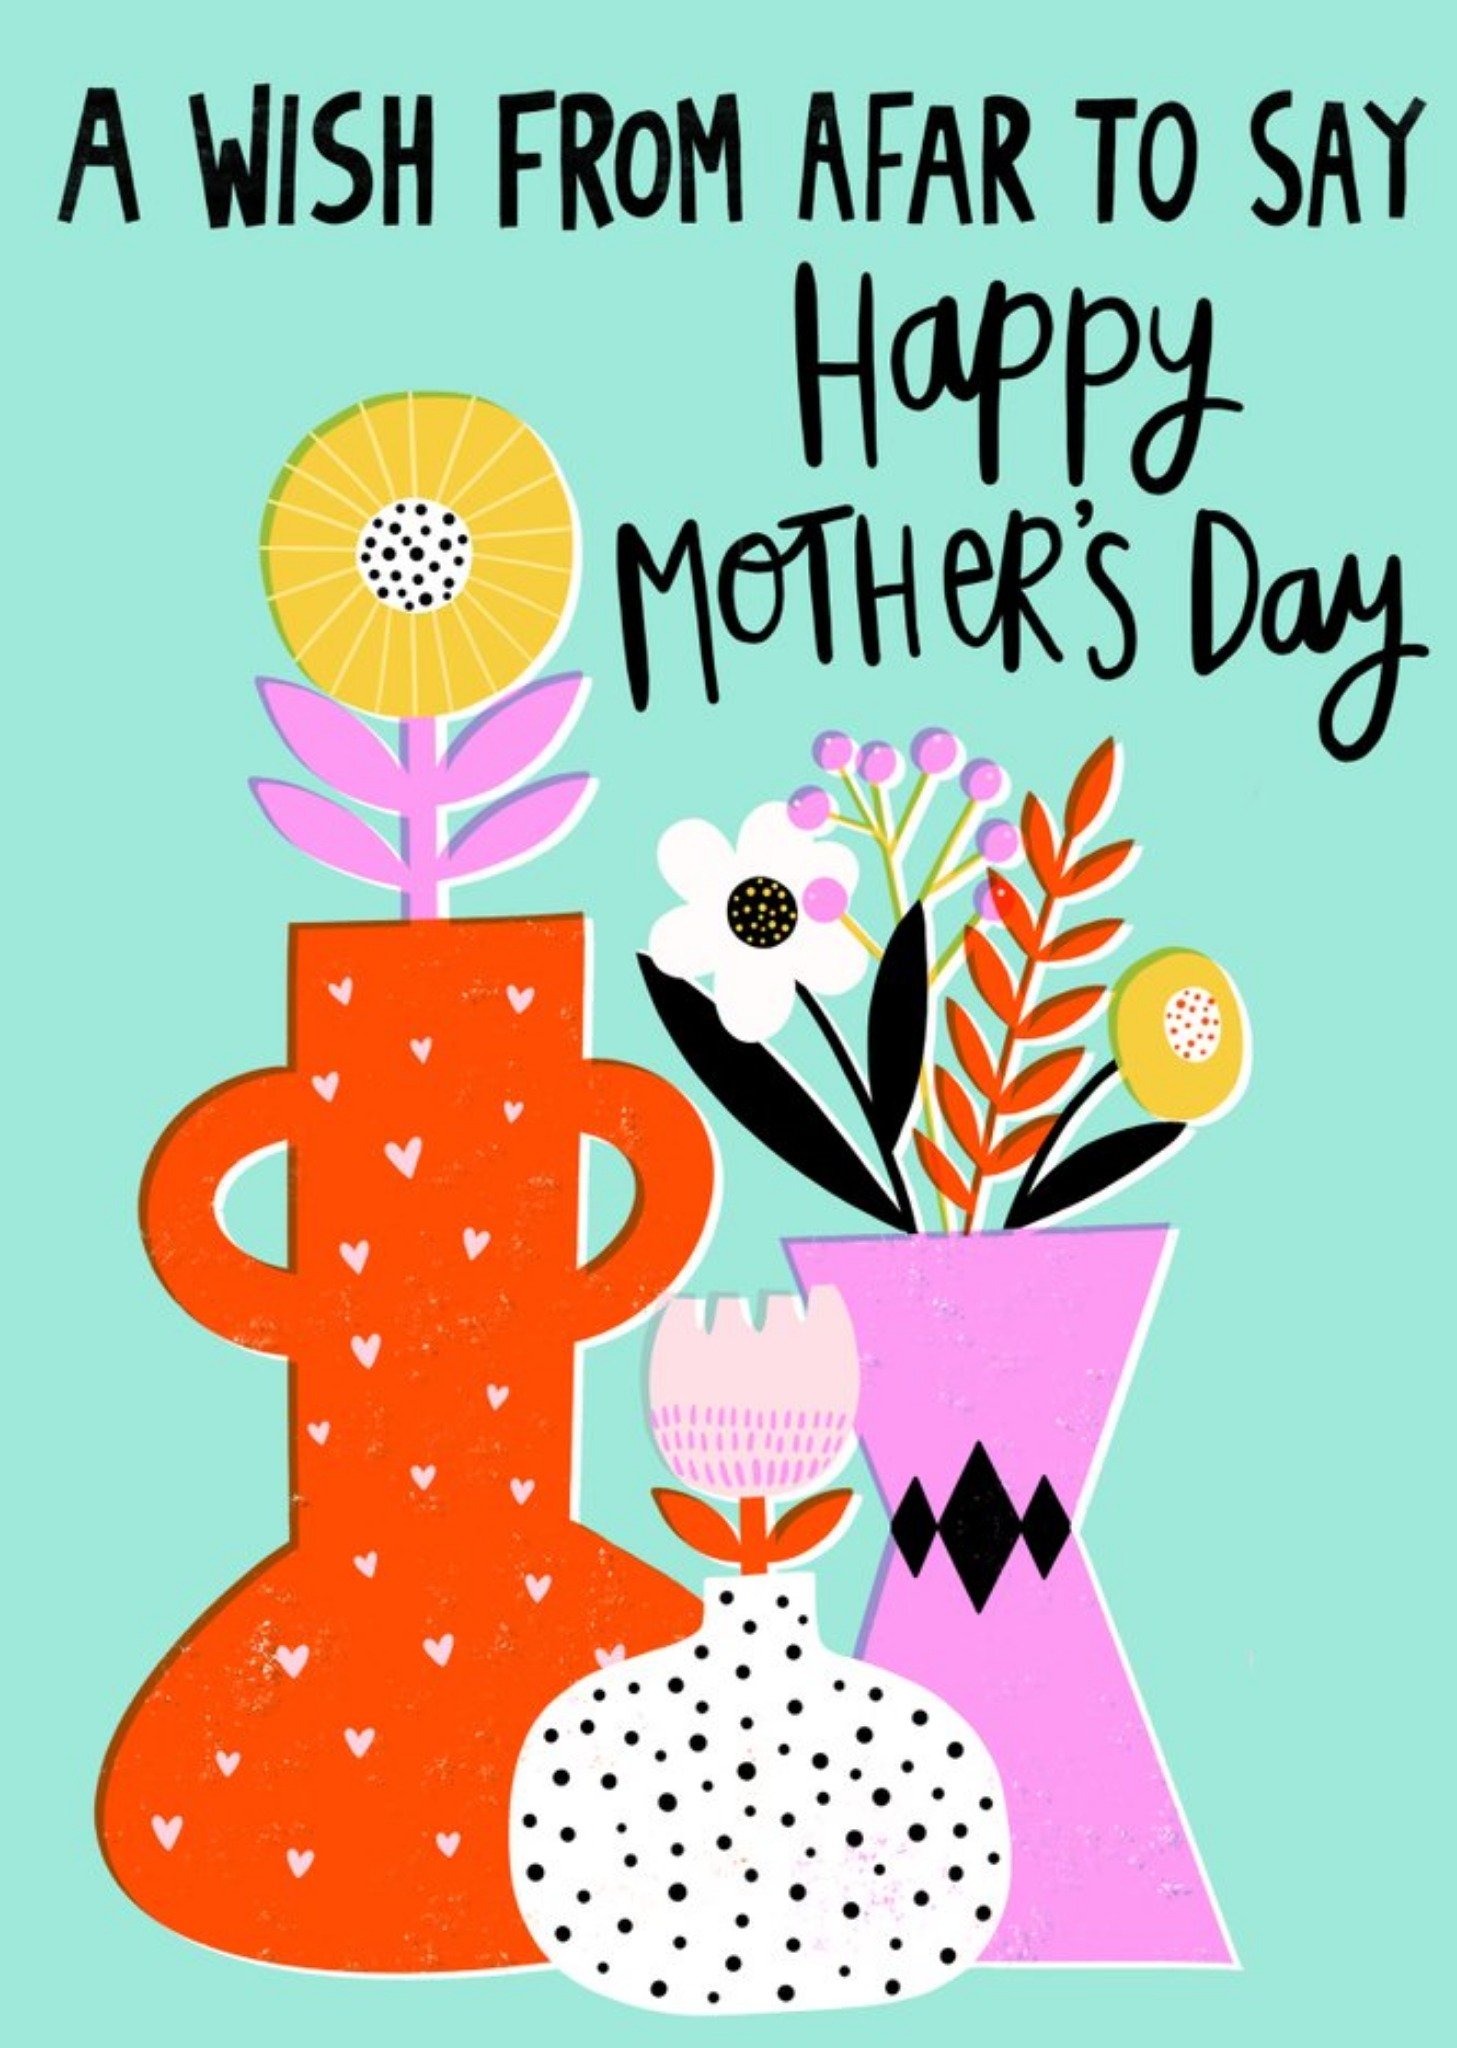 Moonpig A Wish From Afar To Say Happy Mother's Day Bright Floral Graphic Card Ecard